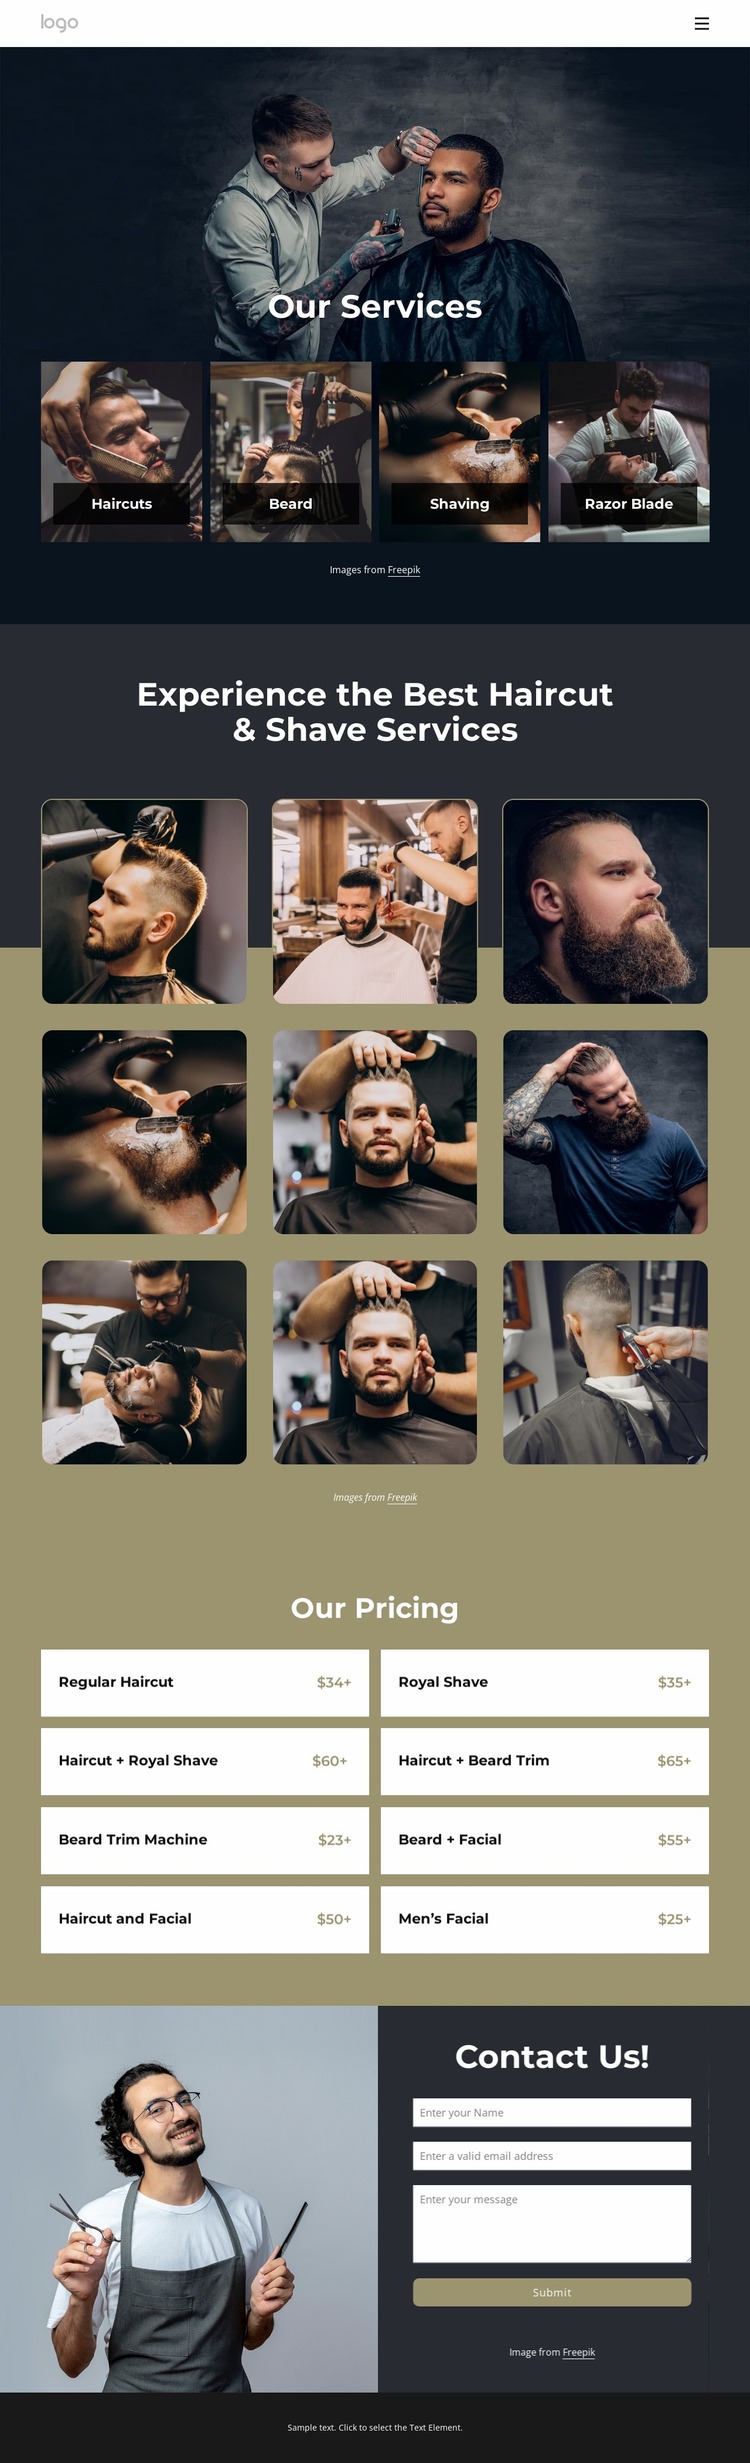 Best haircut and shave services Website Mockup